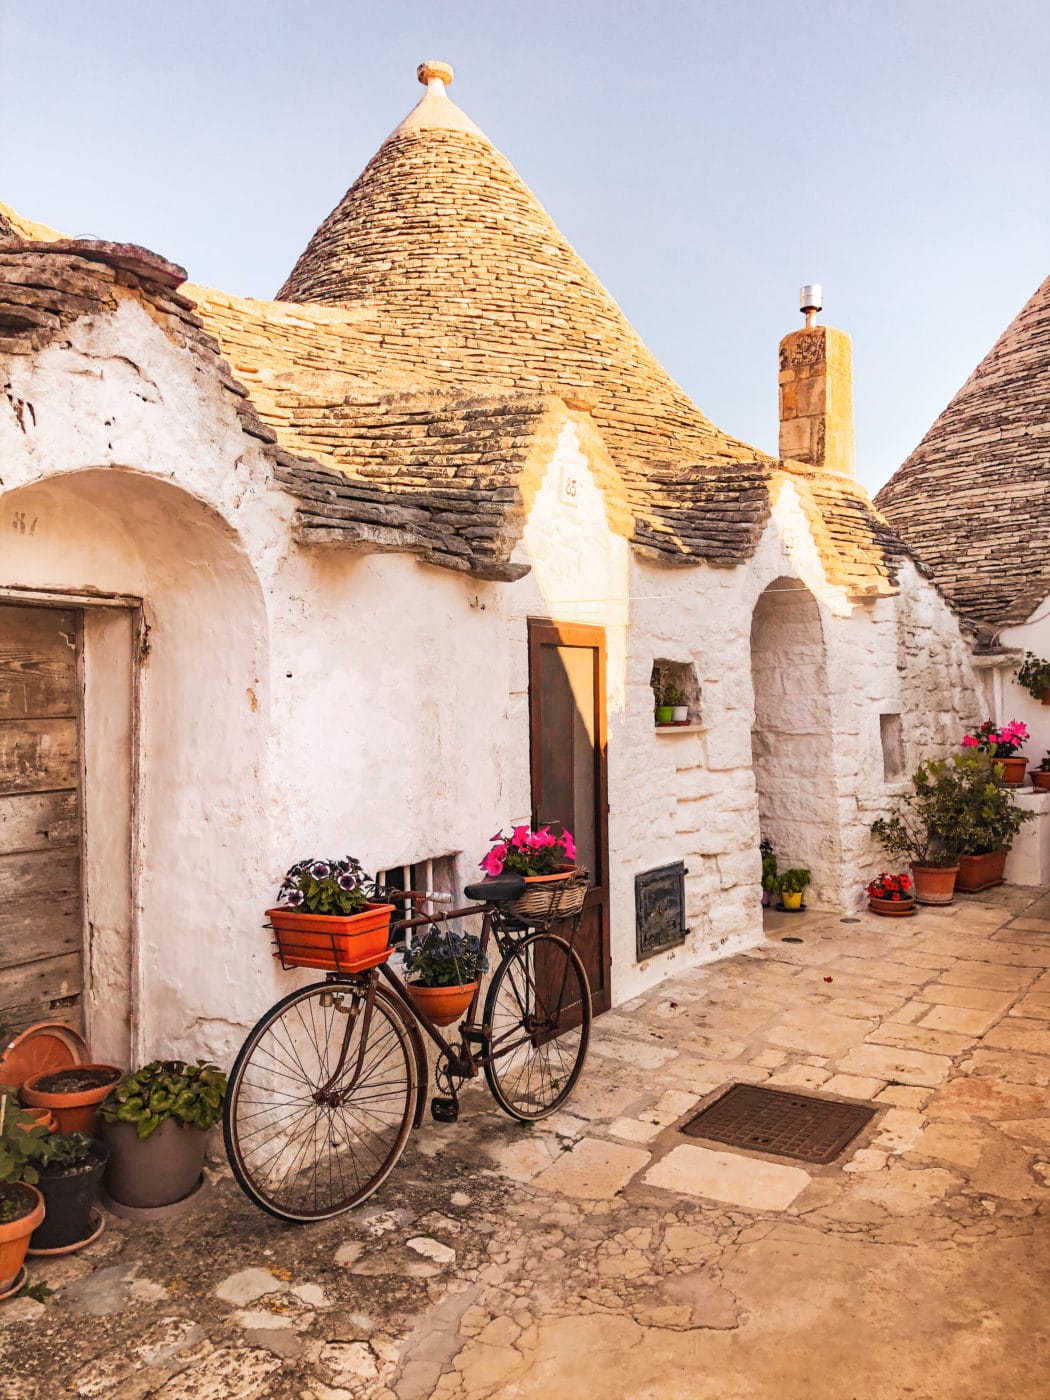 Cobblestoned alley with a view of a trullo and quaint little bike leaning on the side wall - Alberobello Puglia